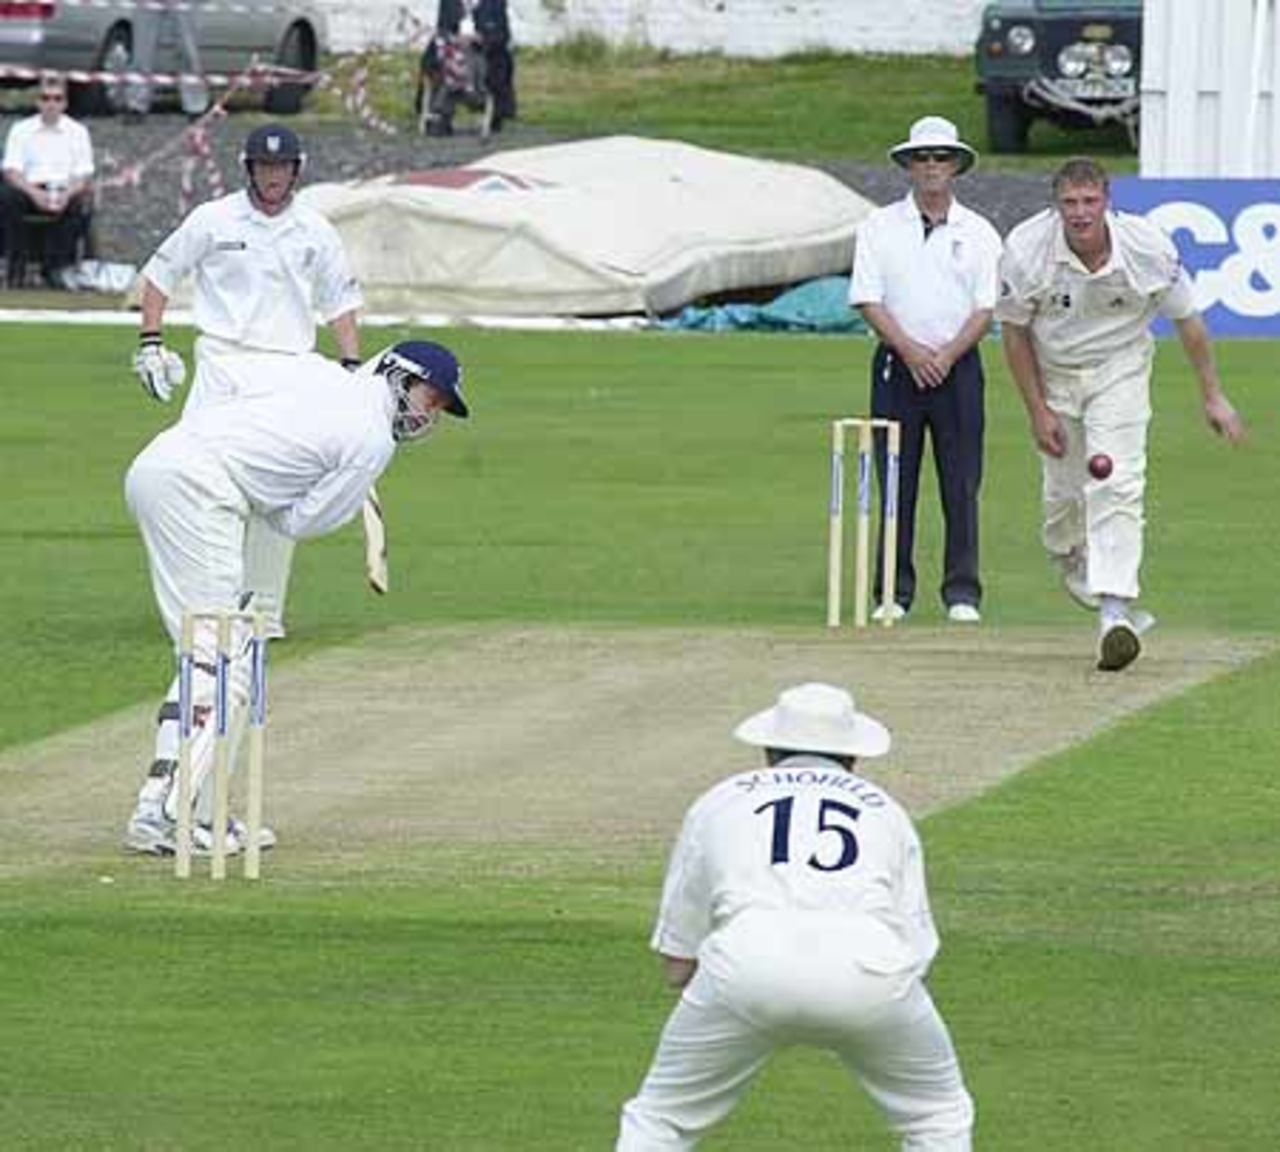 Martin Love of Durham is pinned back on his crease by a ball from Andy Flintoff, C+G Quarter Final, Blackpool, 25 Jul 2001